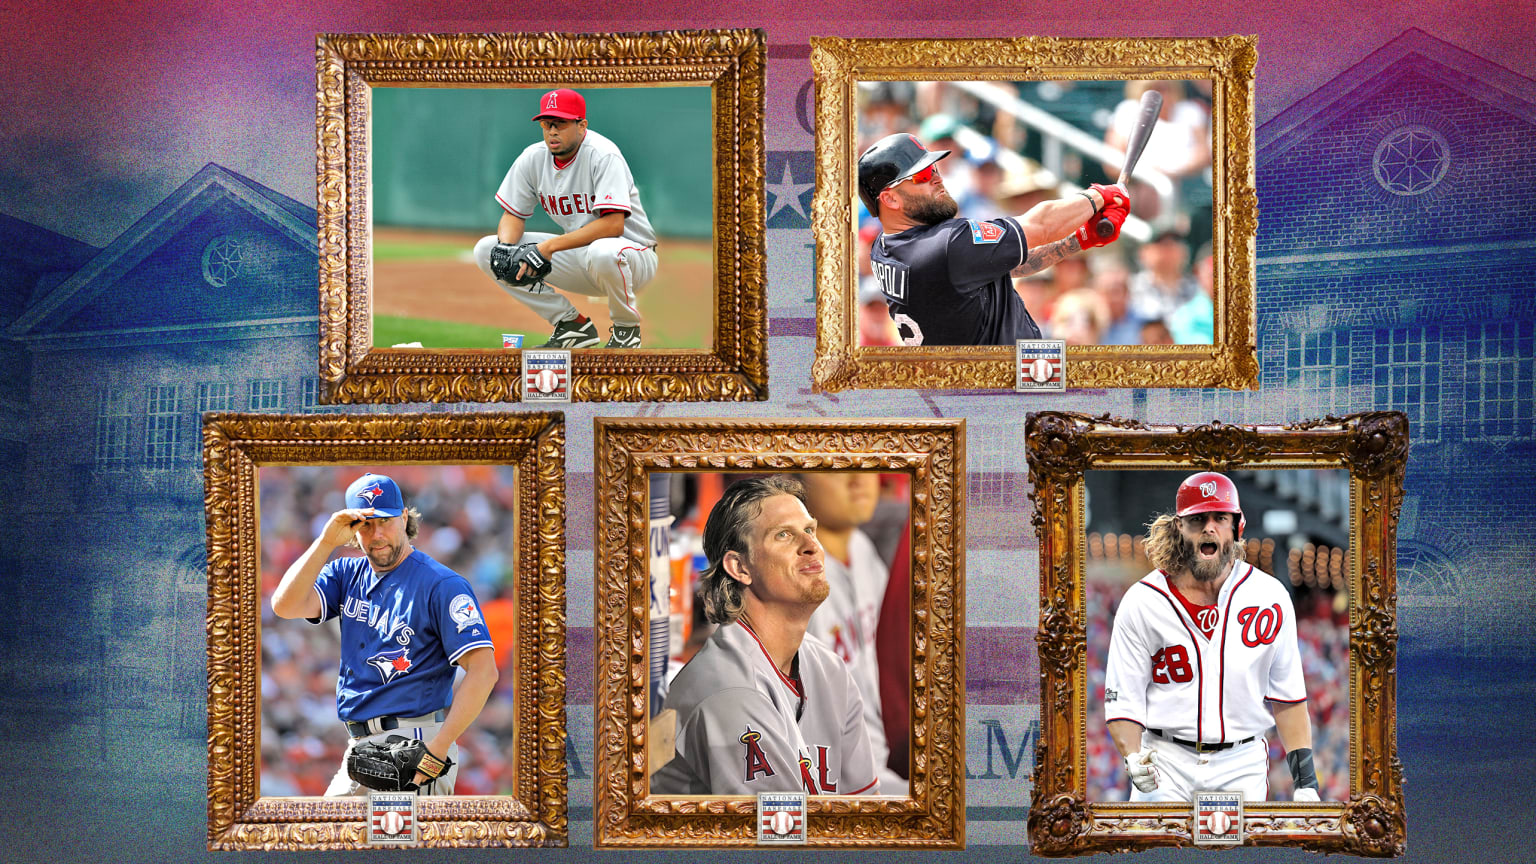 5 ornate frames with images of players in them against a background of the Baseball Hall of Fame